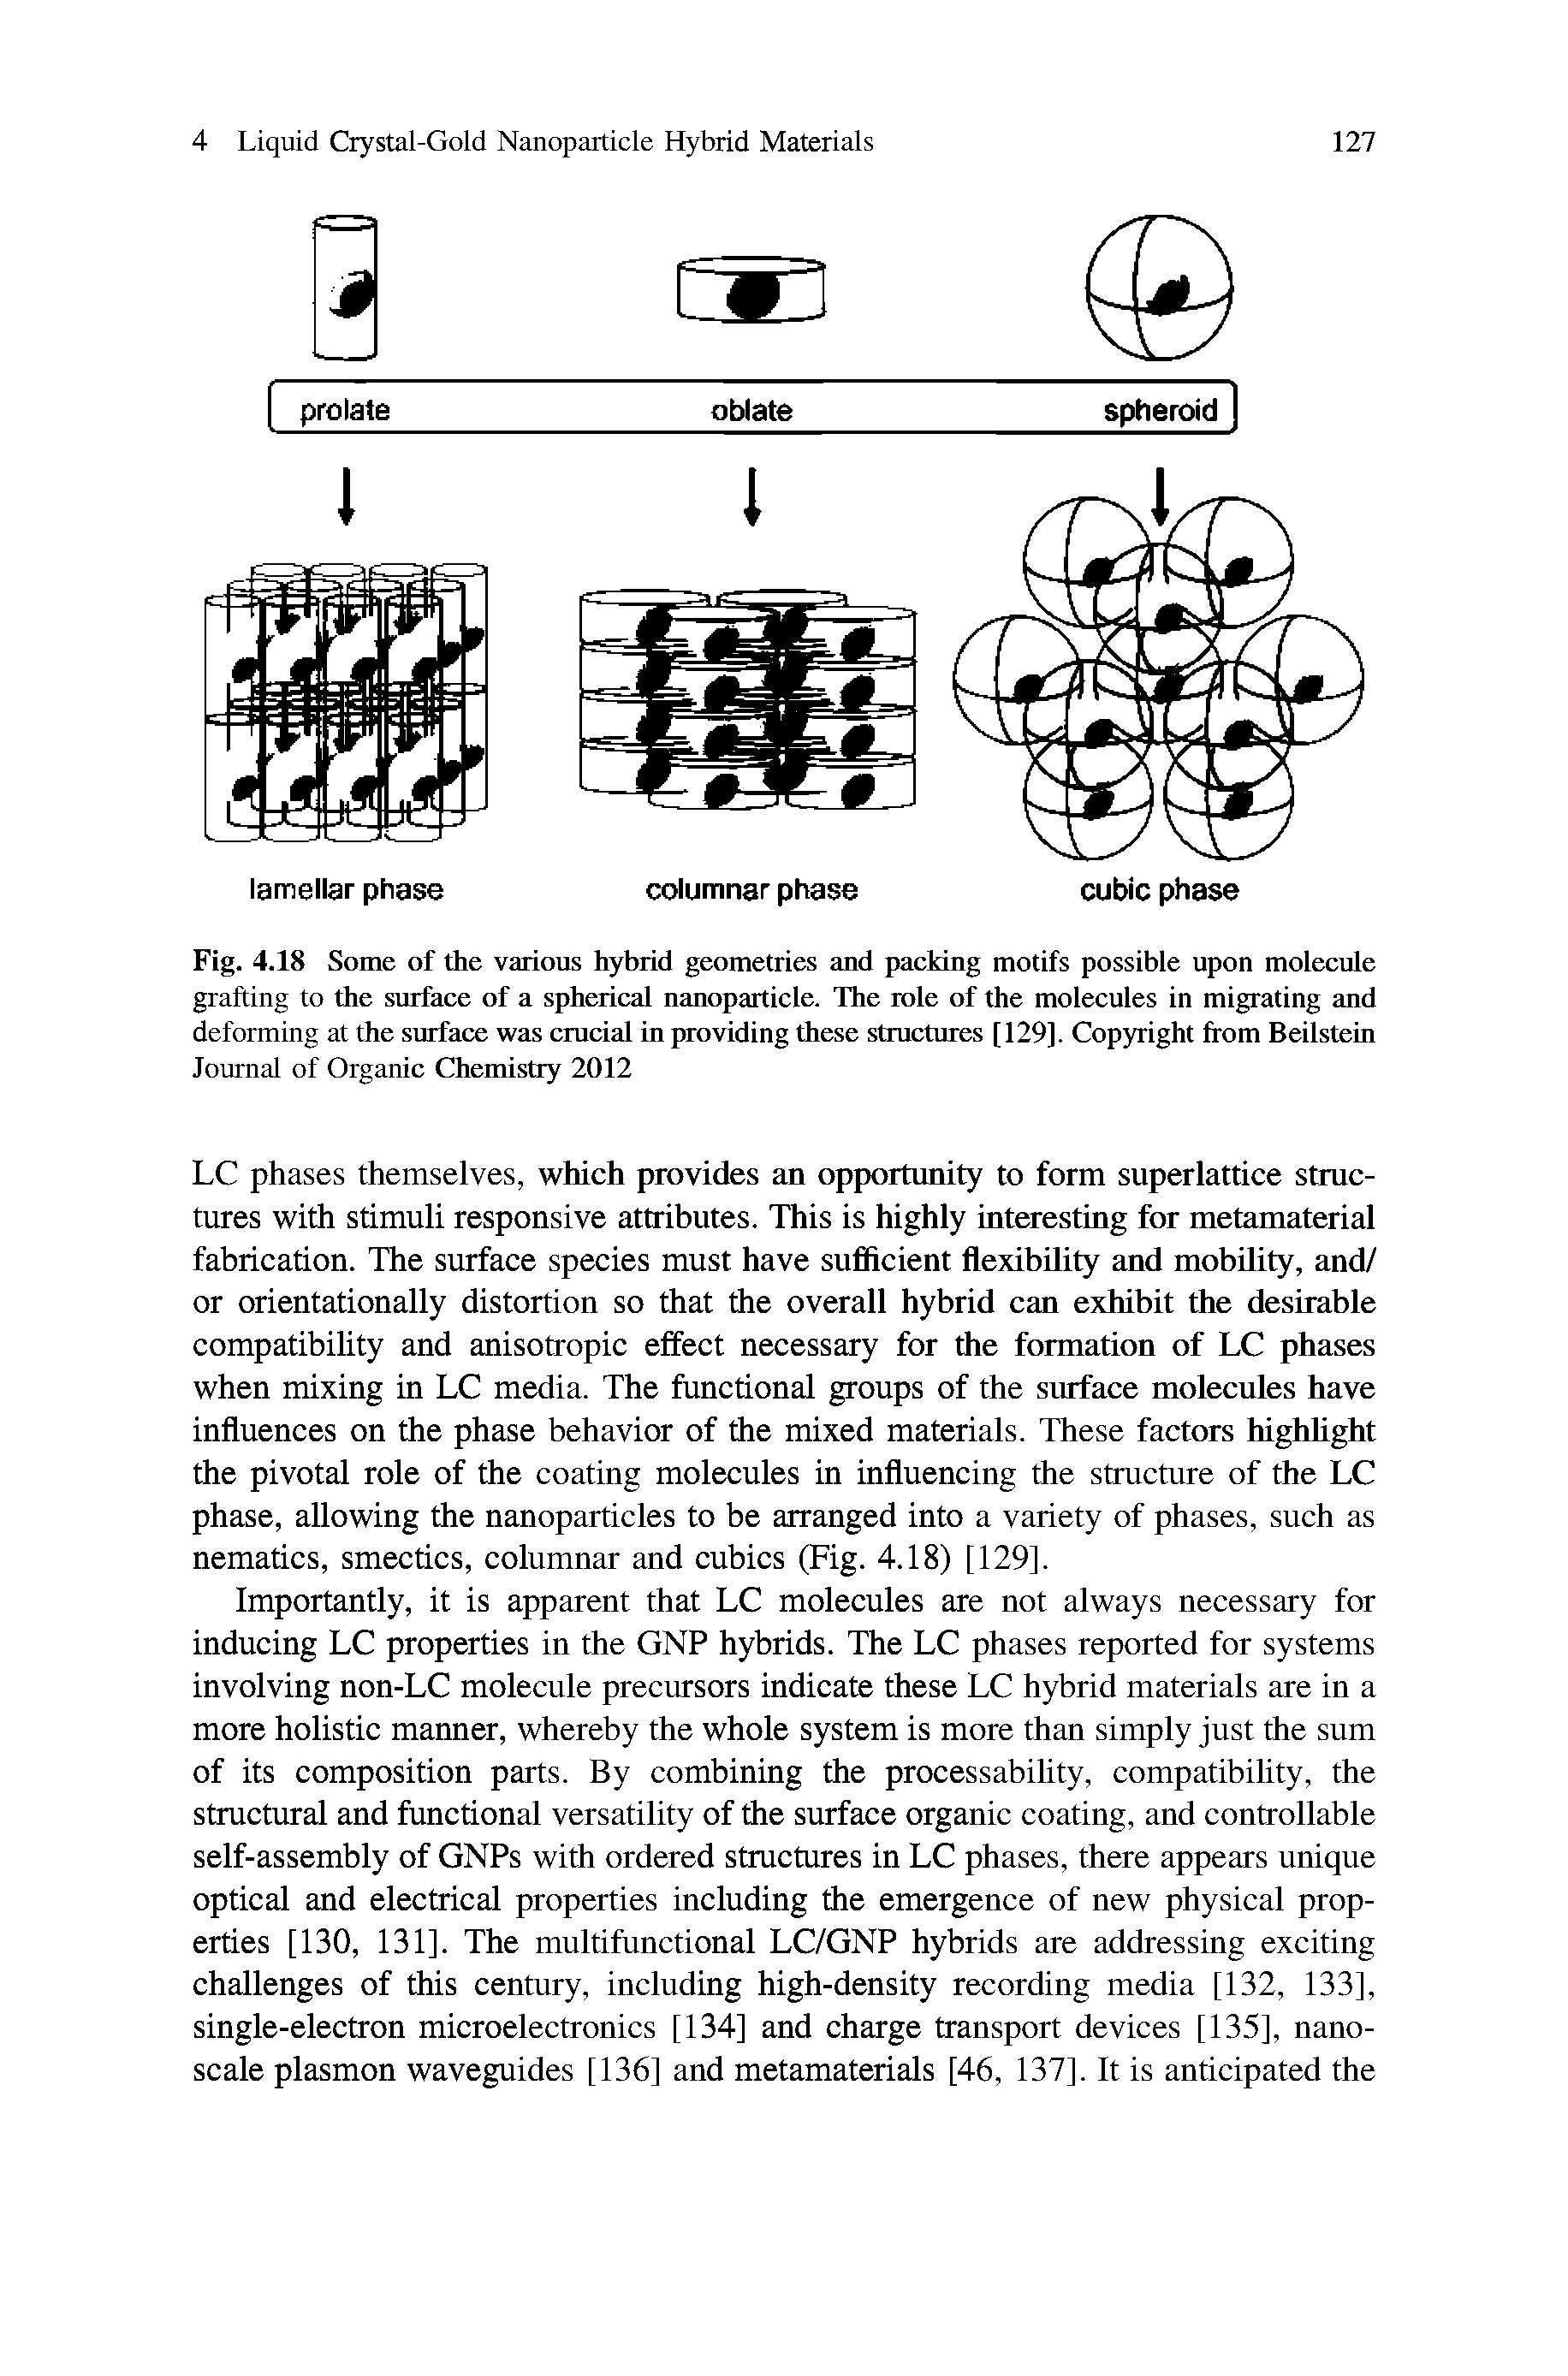 Fig. 4.18 Some of the various hybrid geometries and packing motifs possible upon molecule grafting to the surface of a spherical nanoparticle. The role of the molecules in migrating and deforming at the surface was crucial in providing these structures [129]. Copyright from Beilstein Journal of Organic Chemistry 2012...